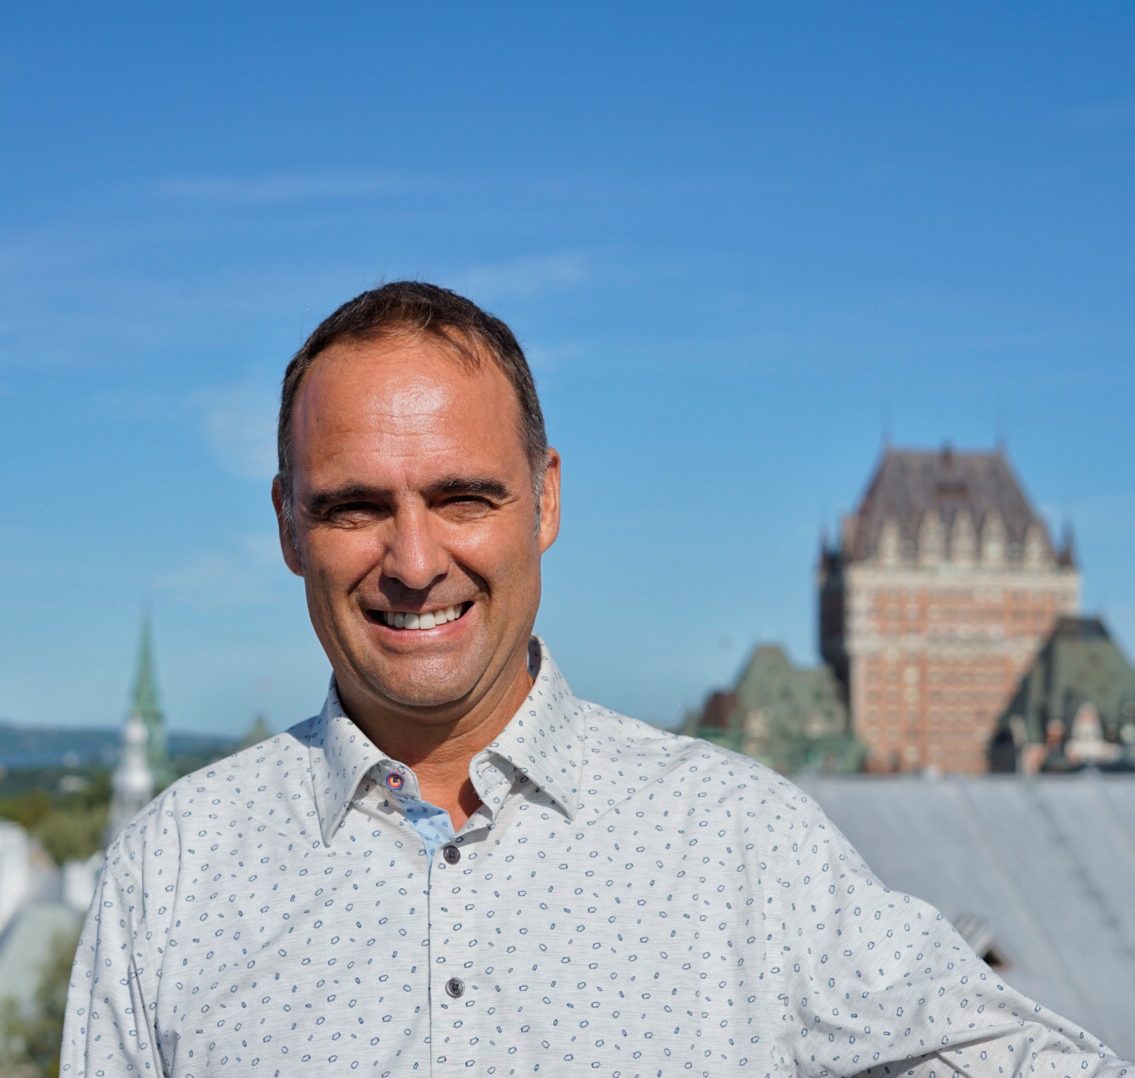 Steeve Gaudreault, private tour guide in Québec City, Canada